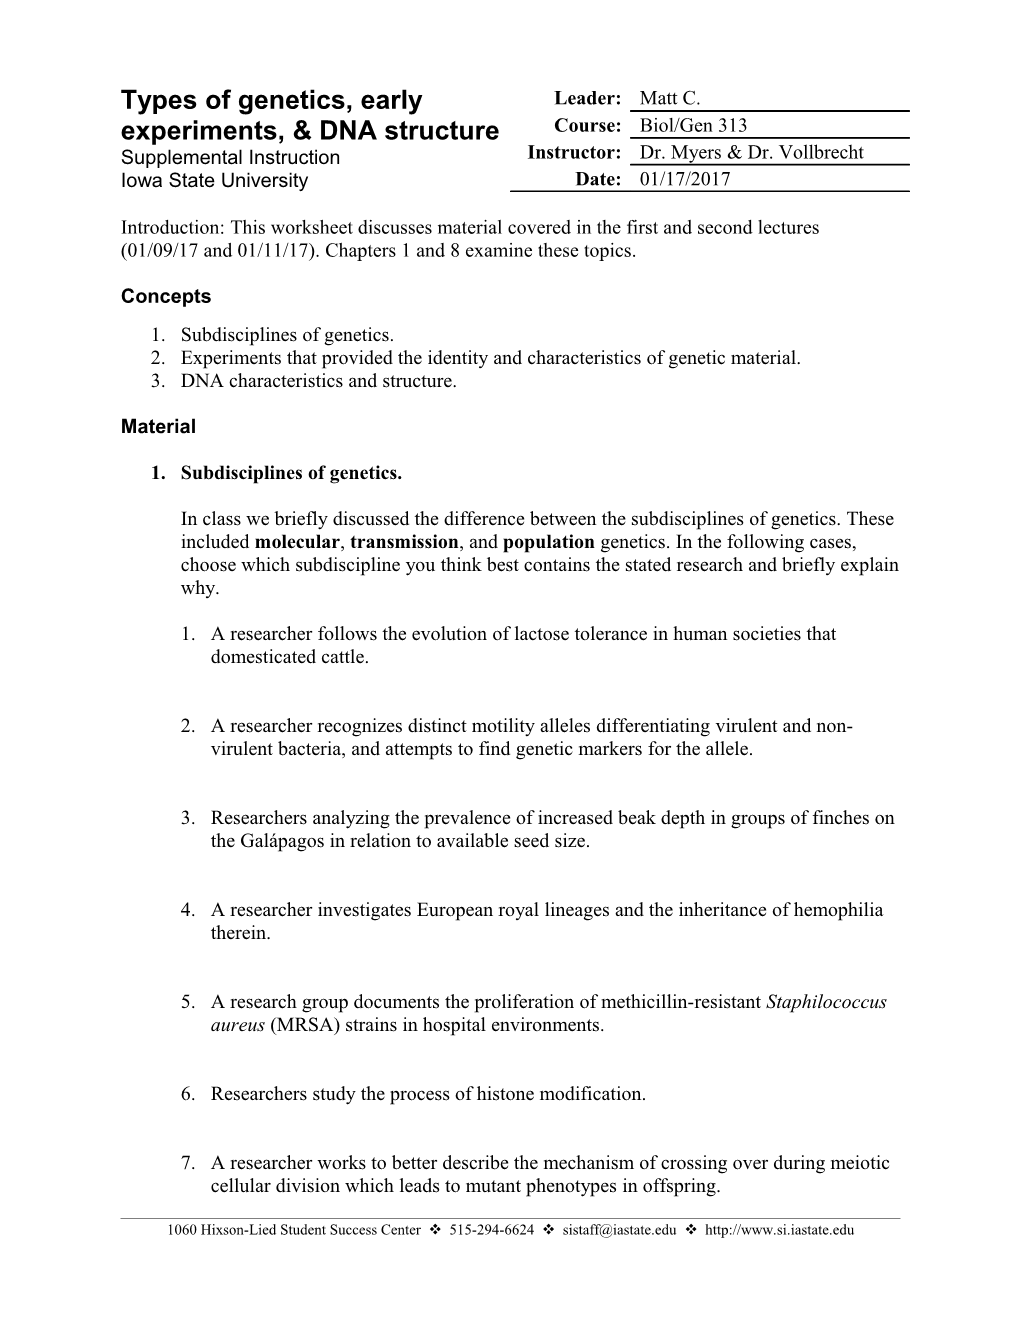 Introduction: This Worksheet Discusses Material Covered in the First and Second Lectures